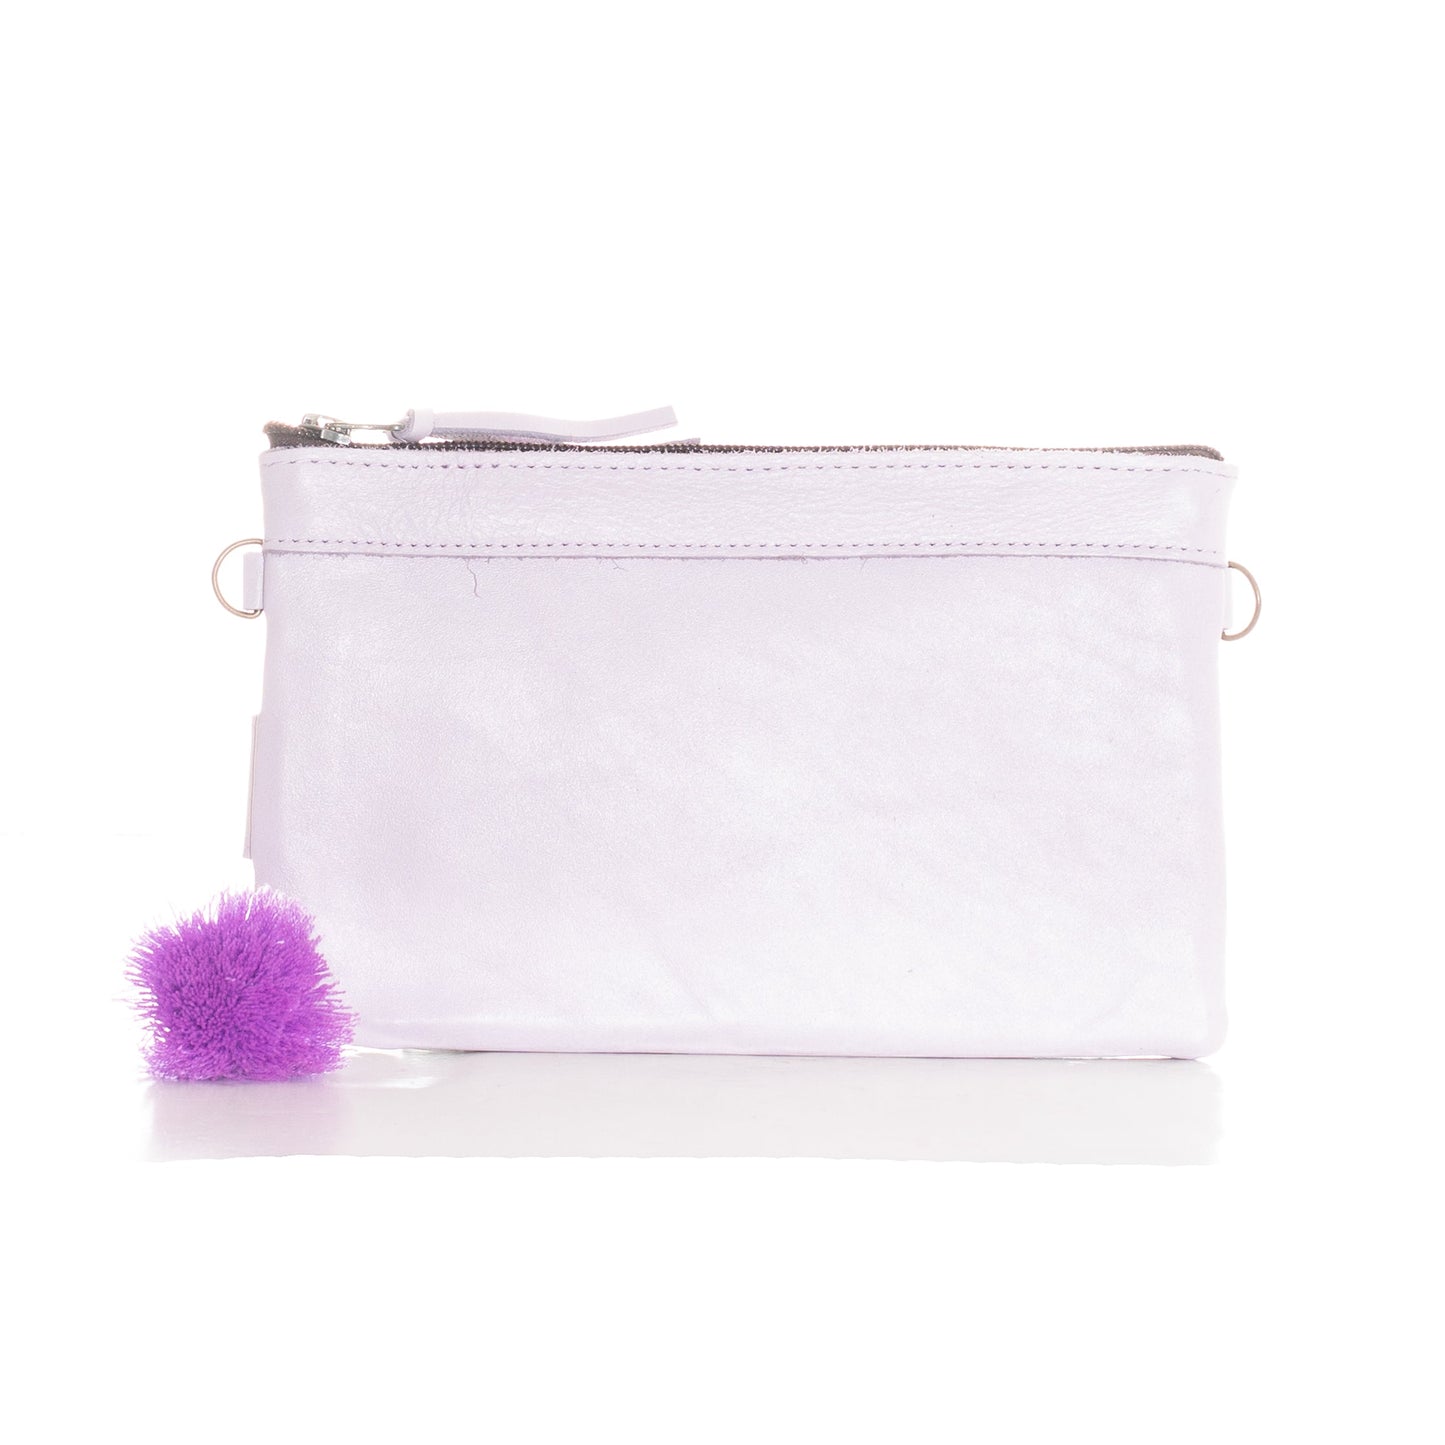 EVERYTHING CLUTCH WITH 3 D-RINGS - FULL LEATHER COLLECTION - LAVENDER